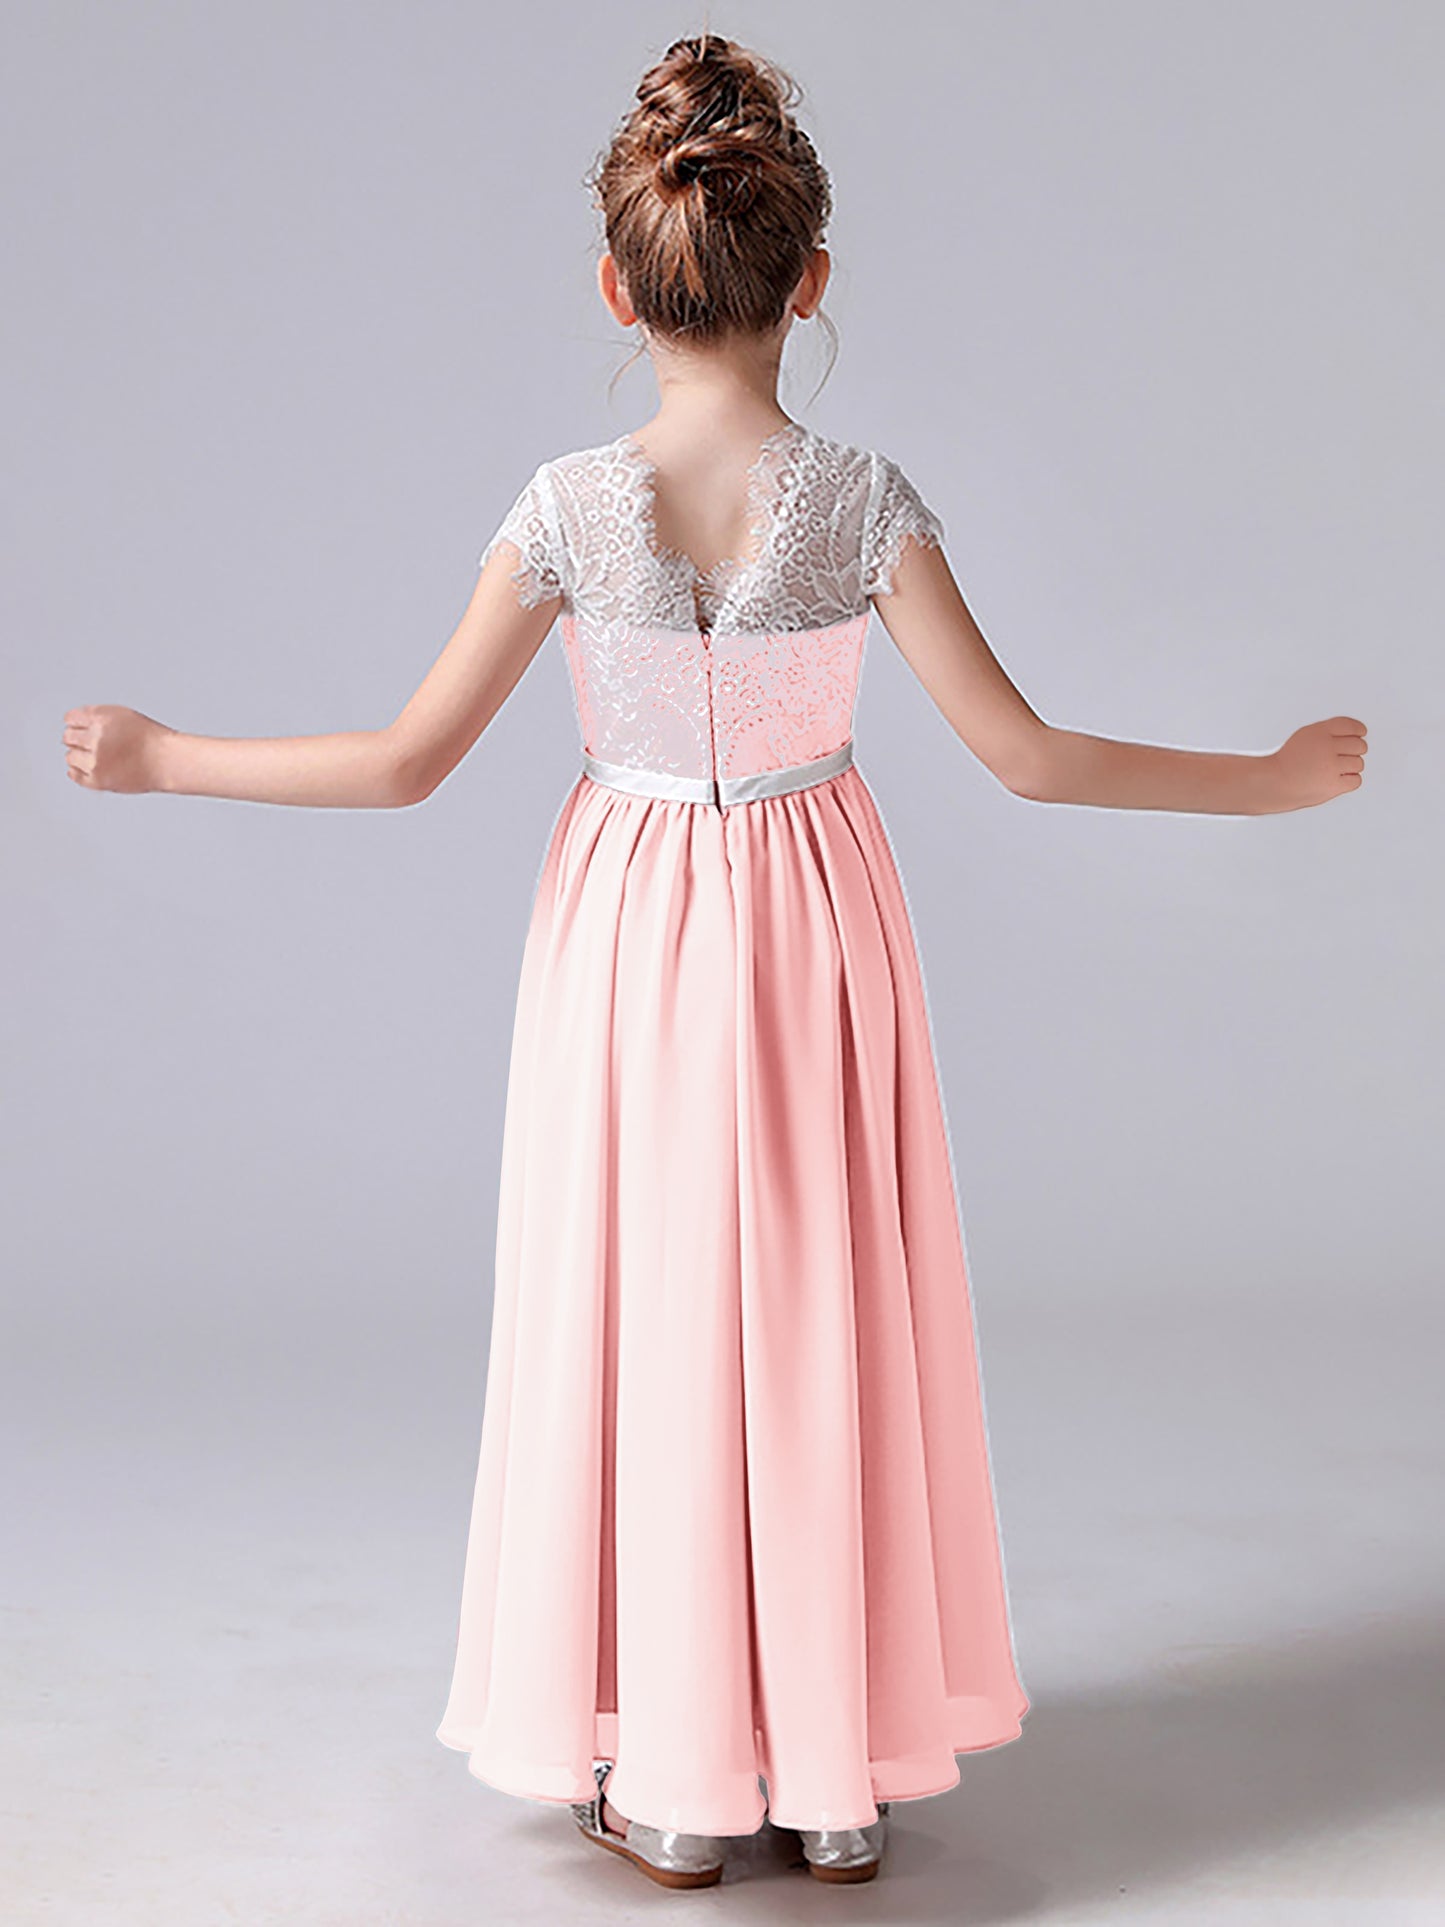 Lace Scoop Junior Bridesmaid Dress with Sleeves